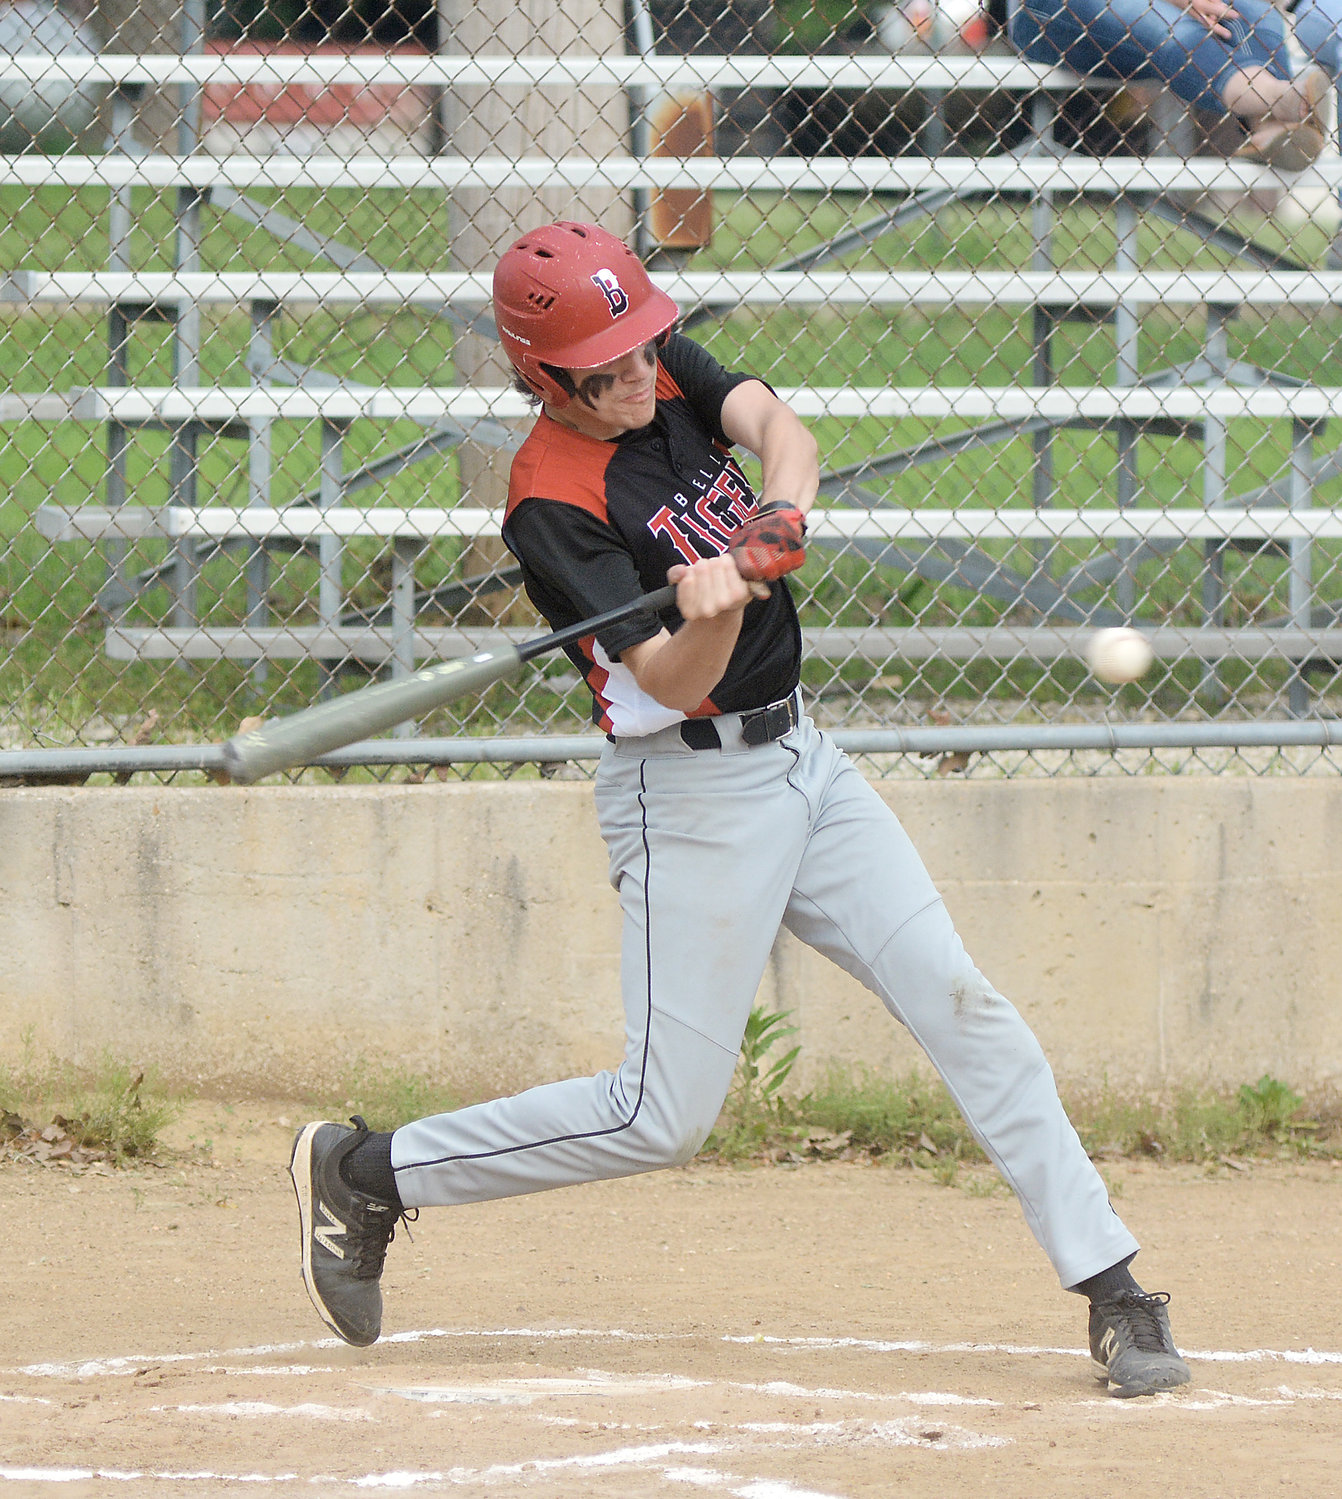 Clayton Shockley takes a swing for one of his three hits last Tuesday afternoon in Highway 89 bragging rights baseball at Belle City Park between the host Tigers and visiting Linn Wildcats.